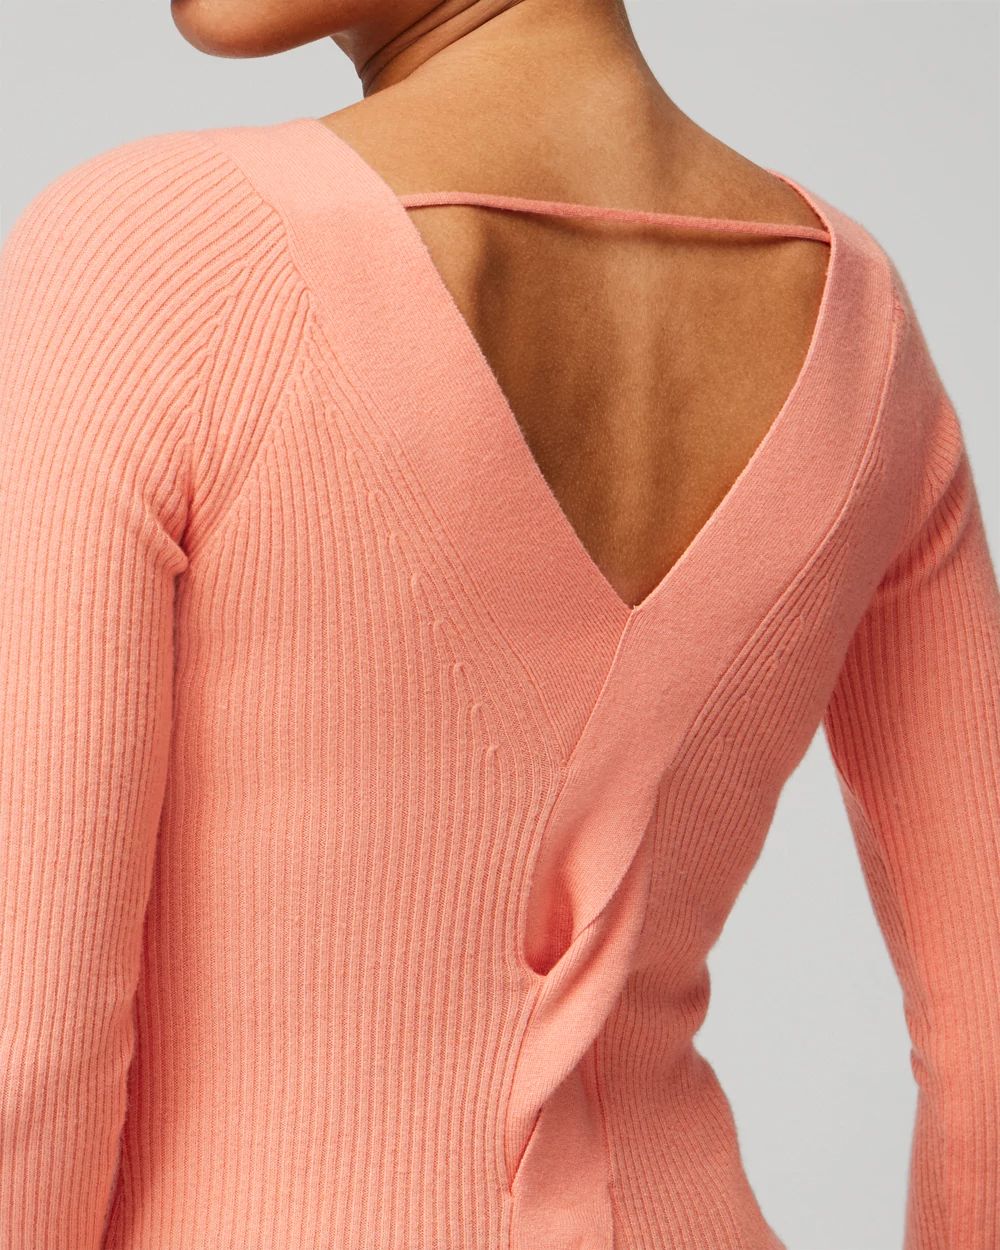 Long Sleeve Ribbed Twist Back Sweater click to view larger image.